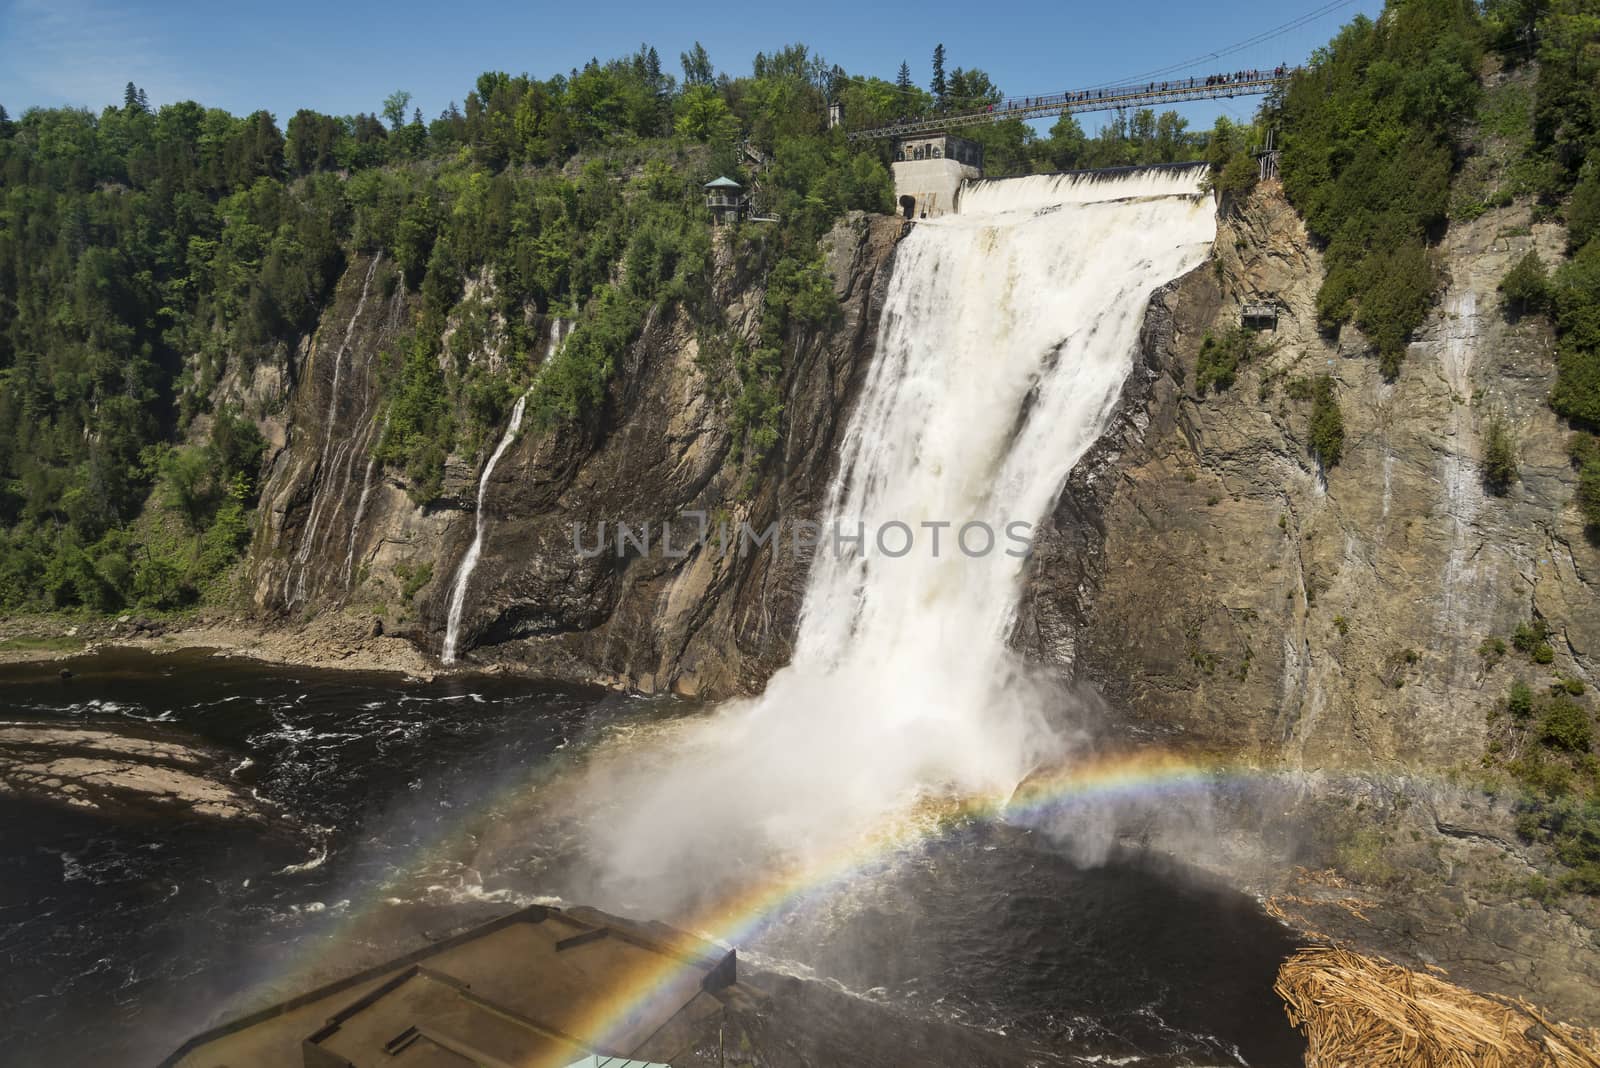 The waterfall Montmorency in Montmorency Falls Park, in Quebec by edella